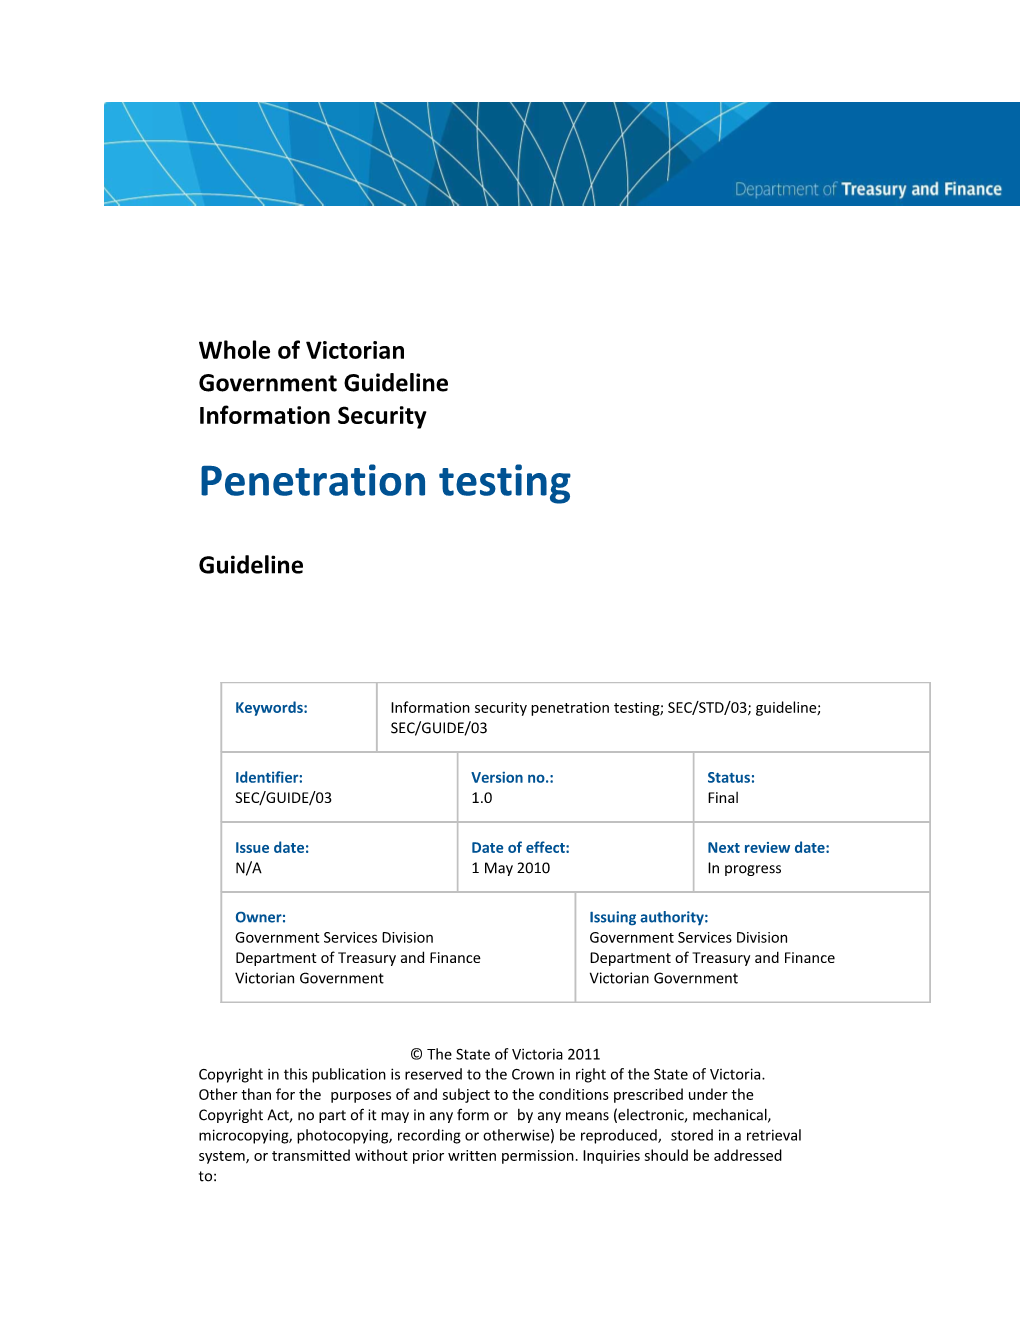 Wovg Guidelines - Information Security Penetration Testing (SEC GUIDE 03)